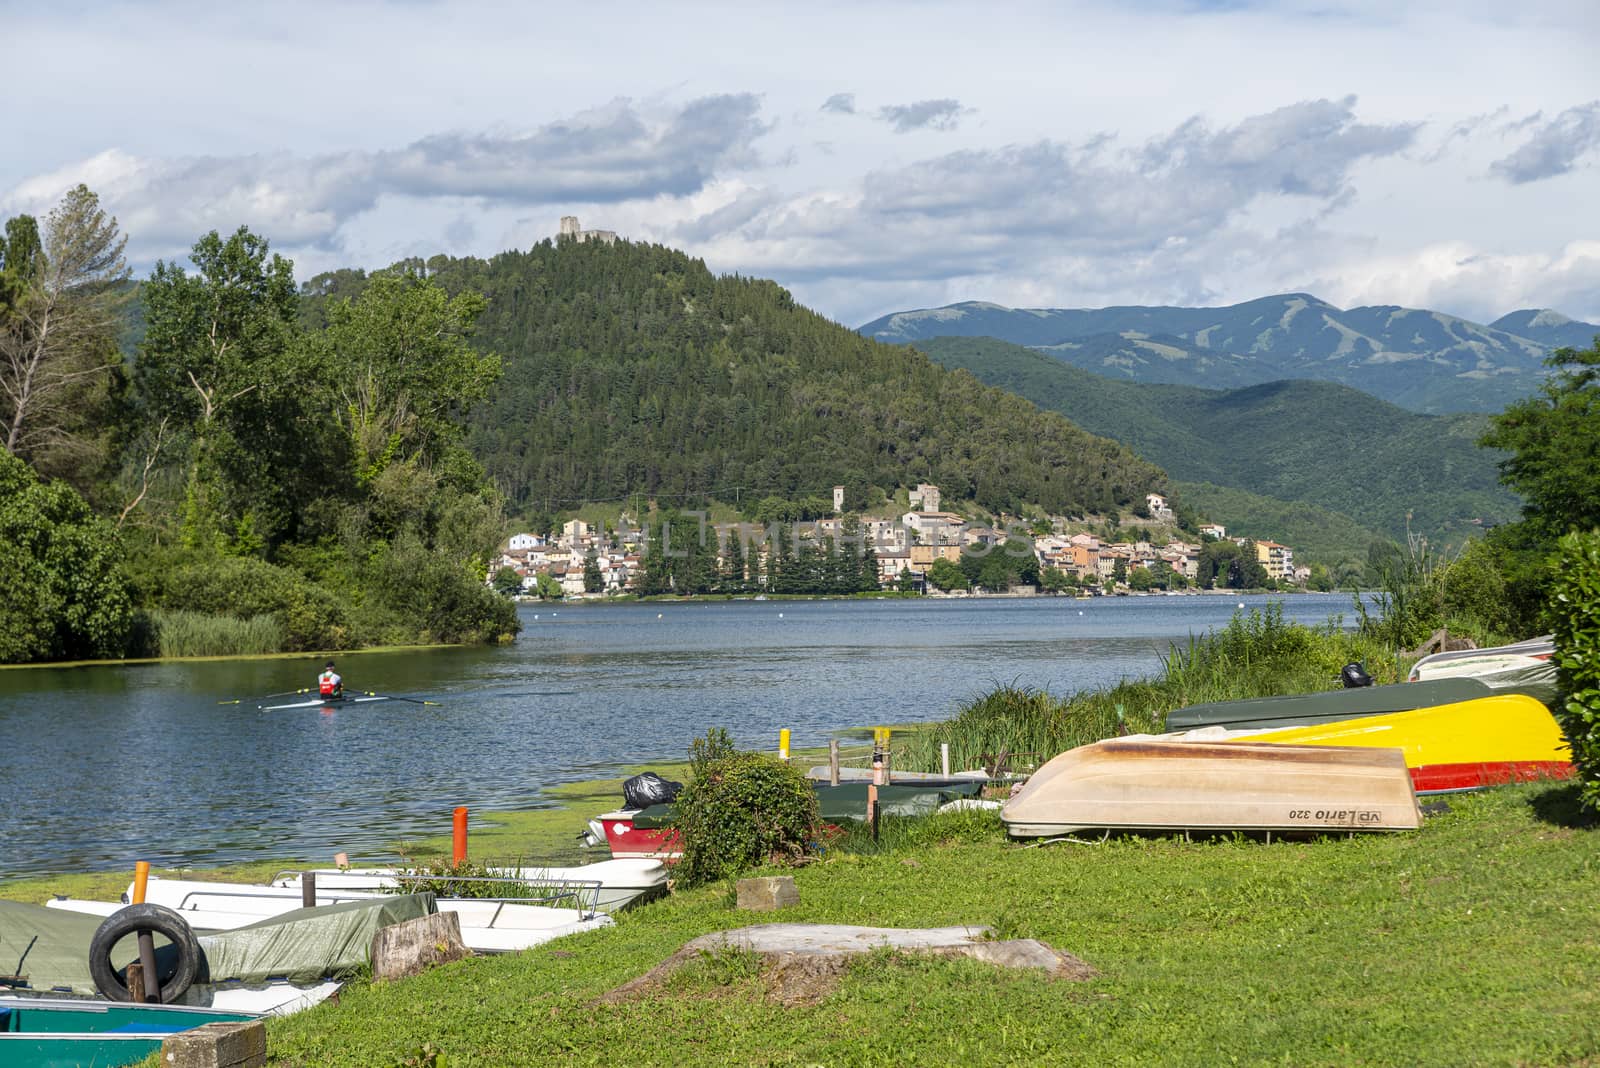 piediluco,italy june 22 2020:velino river which opens onto piediluco lake with rowing vests